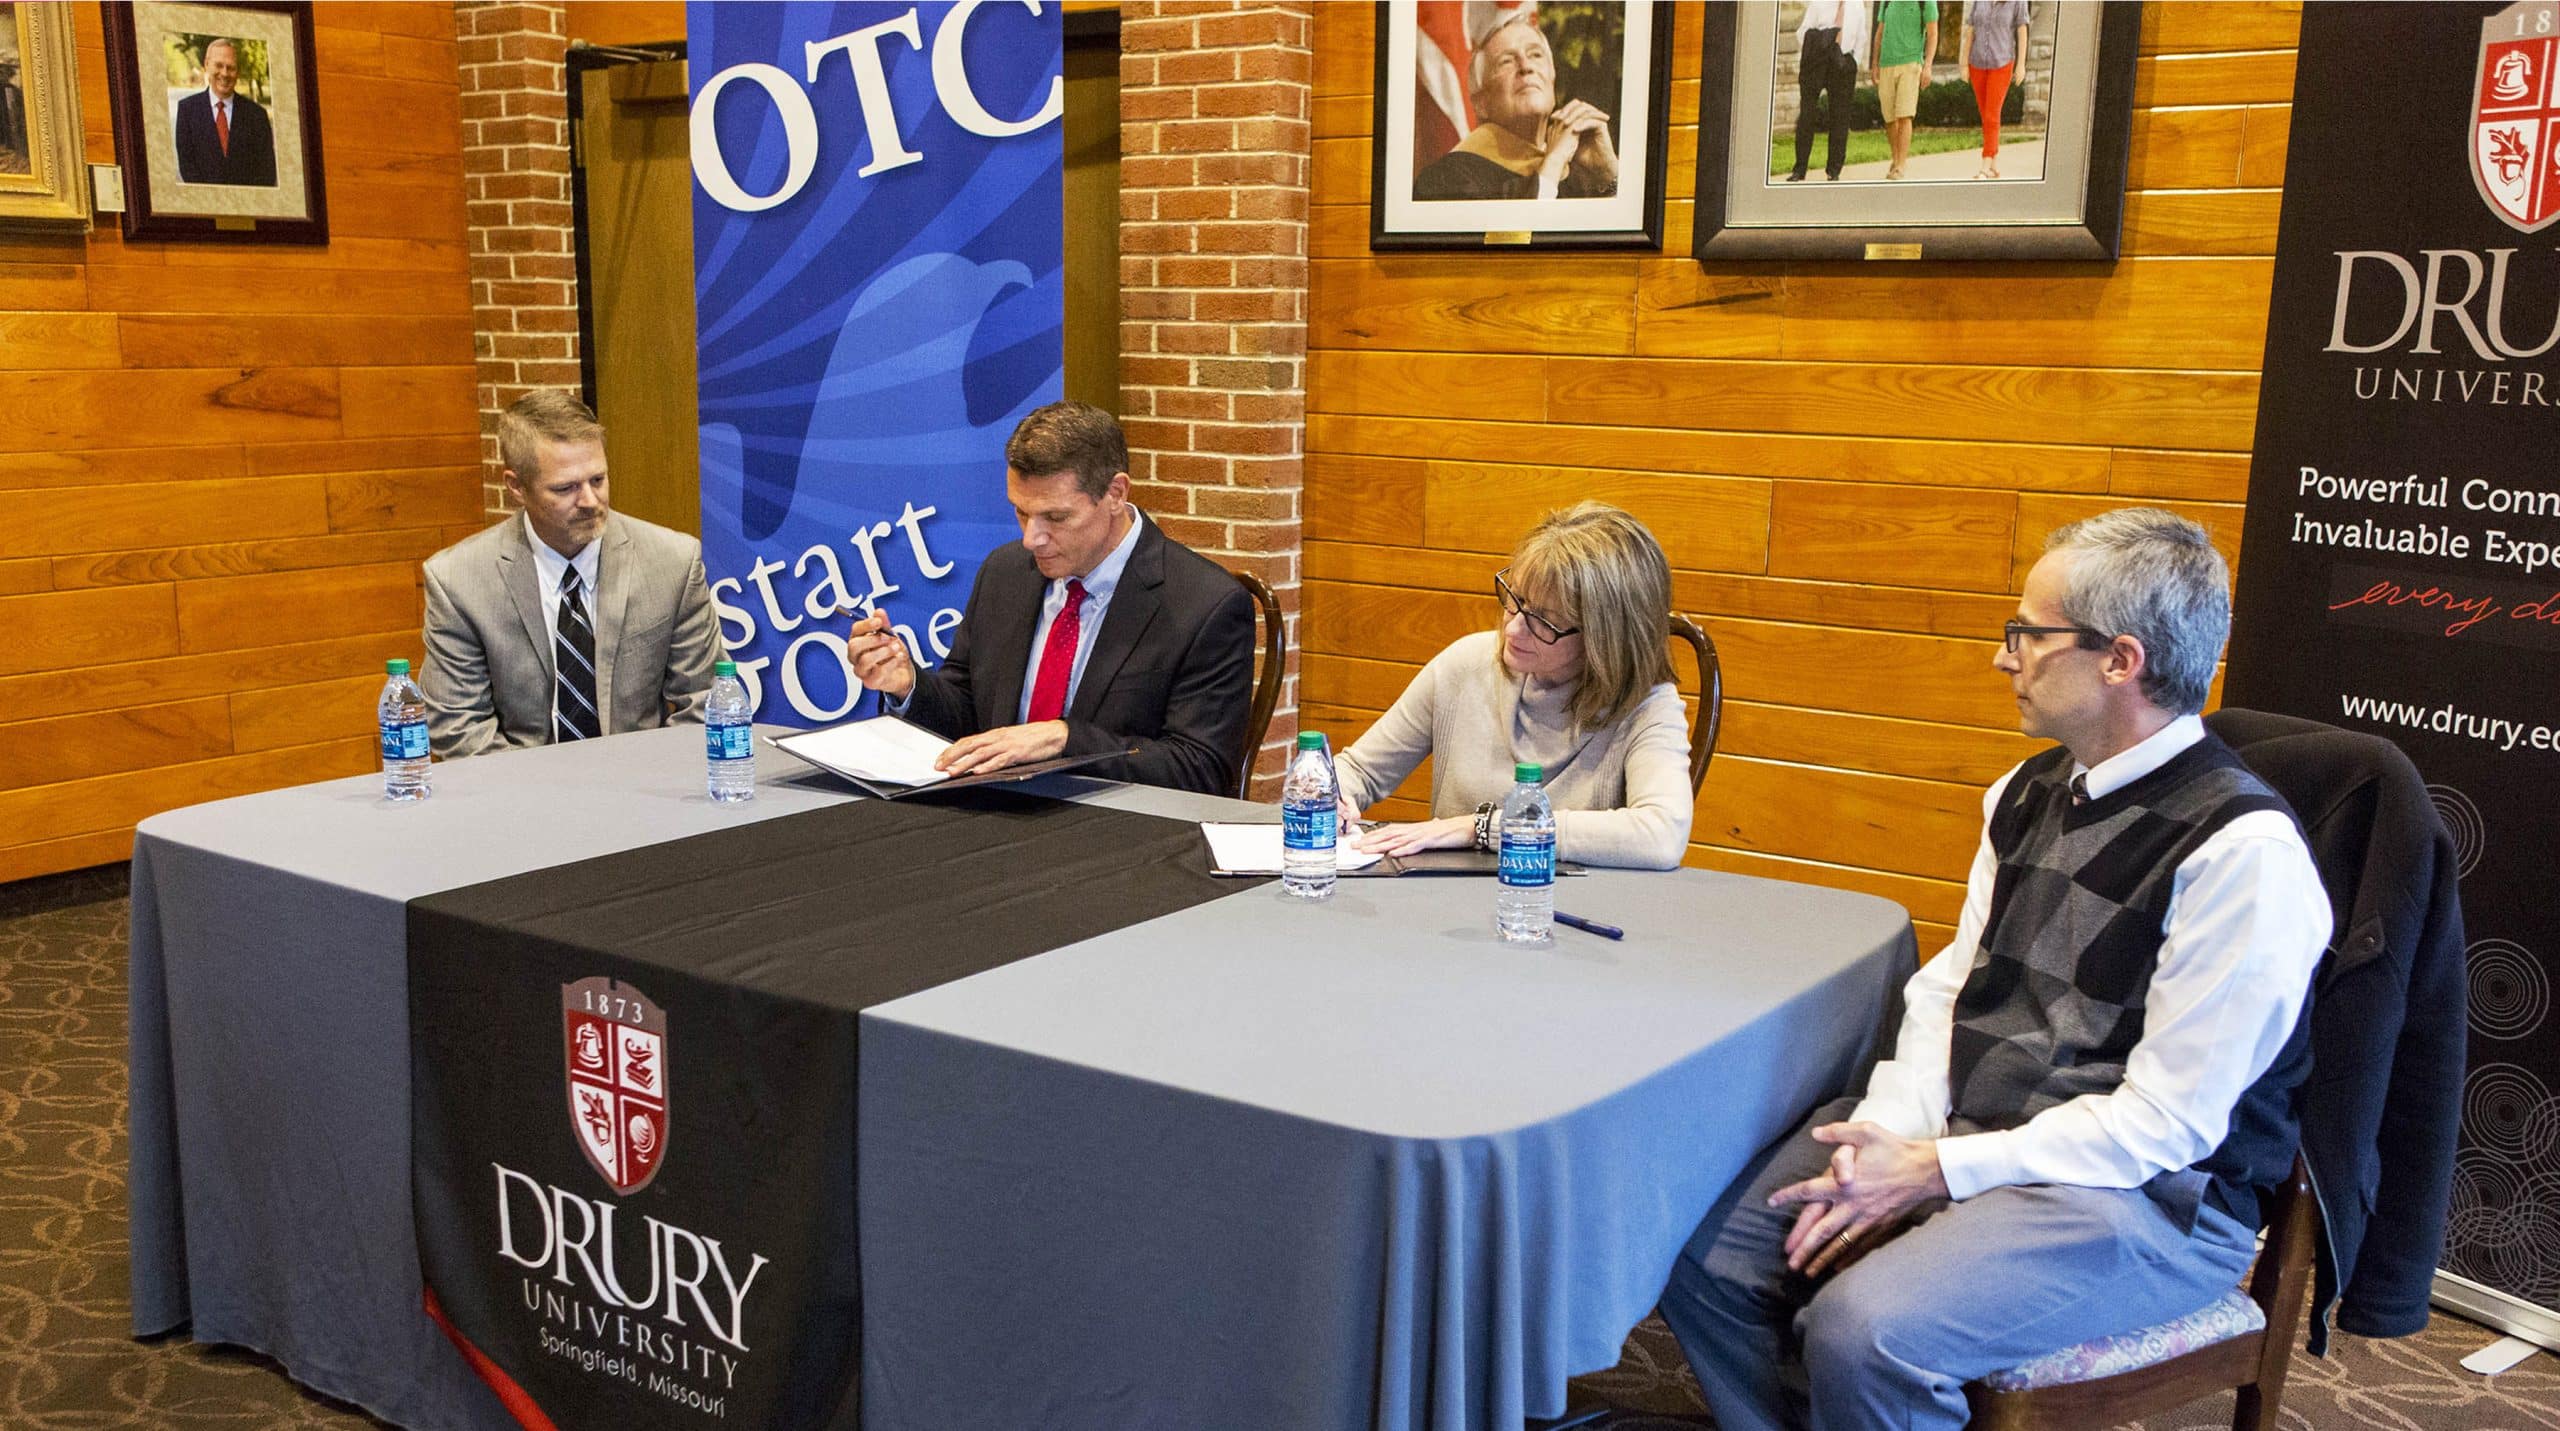 OTC and Drury sign agreement to benefit honors students